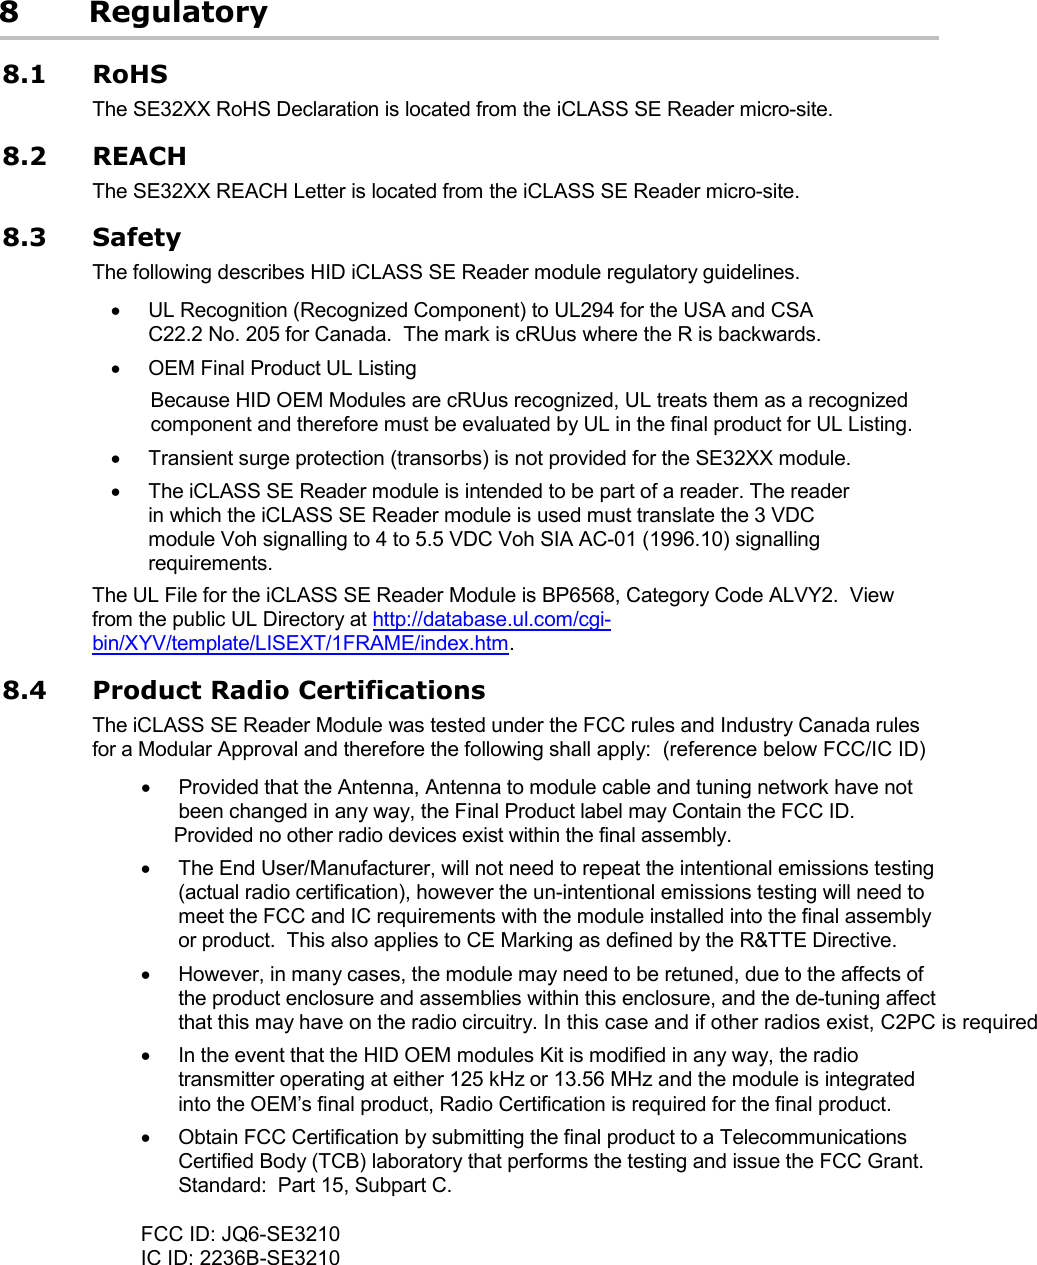 8 Regulatory 8.1 RoHS The SE32XX RoHS Declaration is located from the iCLASS SE Reader micro-site. 8.2 REACH The SE32XX REACH Letter is located from the iCLASS SE Reader micro-site. 8.3 Safety The following describes HID iCLASS SE Reader module regulatory guidelines. • UL Recognition (Recognized Component) to UL294 for the USA and CSA C22.2 No. 205 for Canada.  The mark is cRUus where the R is backwards.  • OEM Final Product UL Listing Because HID OEM Modules are cRUus recognized, UL treats them as a recognized component and therefore must be evaluated by UL in the final product for UL Listing. • Transient surge protection (transorbs) is not provided for the SE32XX module. • The iCLASS SE Reader module is intended to be part of a reader. The reader in which the iCLASS SE Reader module is used must translate the 3 VDC module Voh signalling to 4 to 5.5 VDC Voh SIA AC-01 (1996.10) signalling requirements. The UL File for the iCLASS SE Reader Module is BP6568, Category Code ALVY2.  View from the public UL Directory at http://database.ul.com/cgi-bin/XYV/template/LISEXT/1FRAME/index.htm. 8.4 Product Radio Certifications The iCLASS SE Reader Module was tested under the FCC rules and Industry Canada rules for a Modular Approval and therefore the following shall apply:  (reference below FCC/IC ID)• Provided that the Antenna, Antenna to module cable and tuning network have not been changed in any way, the Final Product label may Contain the FCC ID.       Provided no other radio devices exist within the final assembly.  • The End User/Manufacturer, will not need to repeat the intentional emissions testing (actual radio certification), however the un-intentional emissions testing will need to meet the FCC and IC requirements with the module installed into the final assembly or product.  This also applies to CE Marking as defined by the R&amp;TTE Directive.• However, in many cases, the module may need to be retuned, due to the affects of the product enclosure and assemblies within this enclosure, and the de-tuning affect that this may have on the radio circuitry. In this case and if other radios exist, C2PC is required• In the event that the HID OEM modules Kit is modified in any way, the radio transmitter operating at either 125 kHz or 13.56 MHz and the module is integrated into the OEM’s final product, Radio Certification is required for the final product. • Obtain FCC Certification by submitting the final product to a Telecommunications Certified Body (TCB) laboratory that performs the testing and issue the FCC Grant.  Standard:  Part 15, Subpart C.       FCC ID: JQ6-SE3210IC ID: 2236B-SE3210 